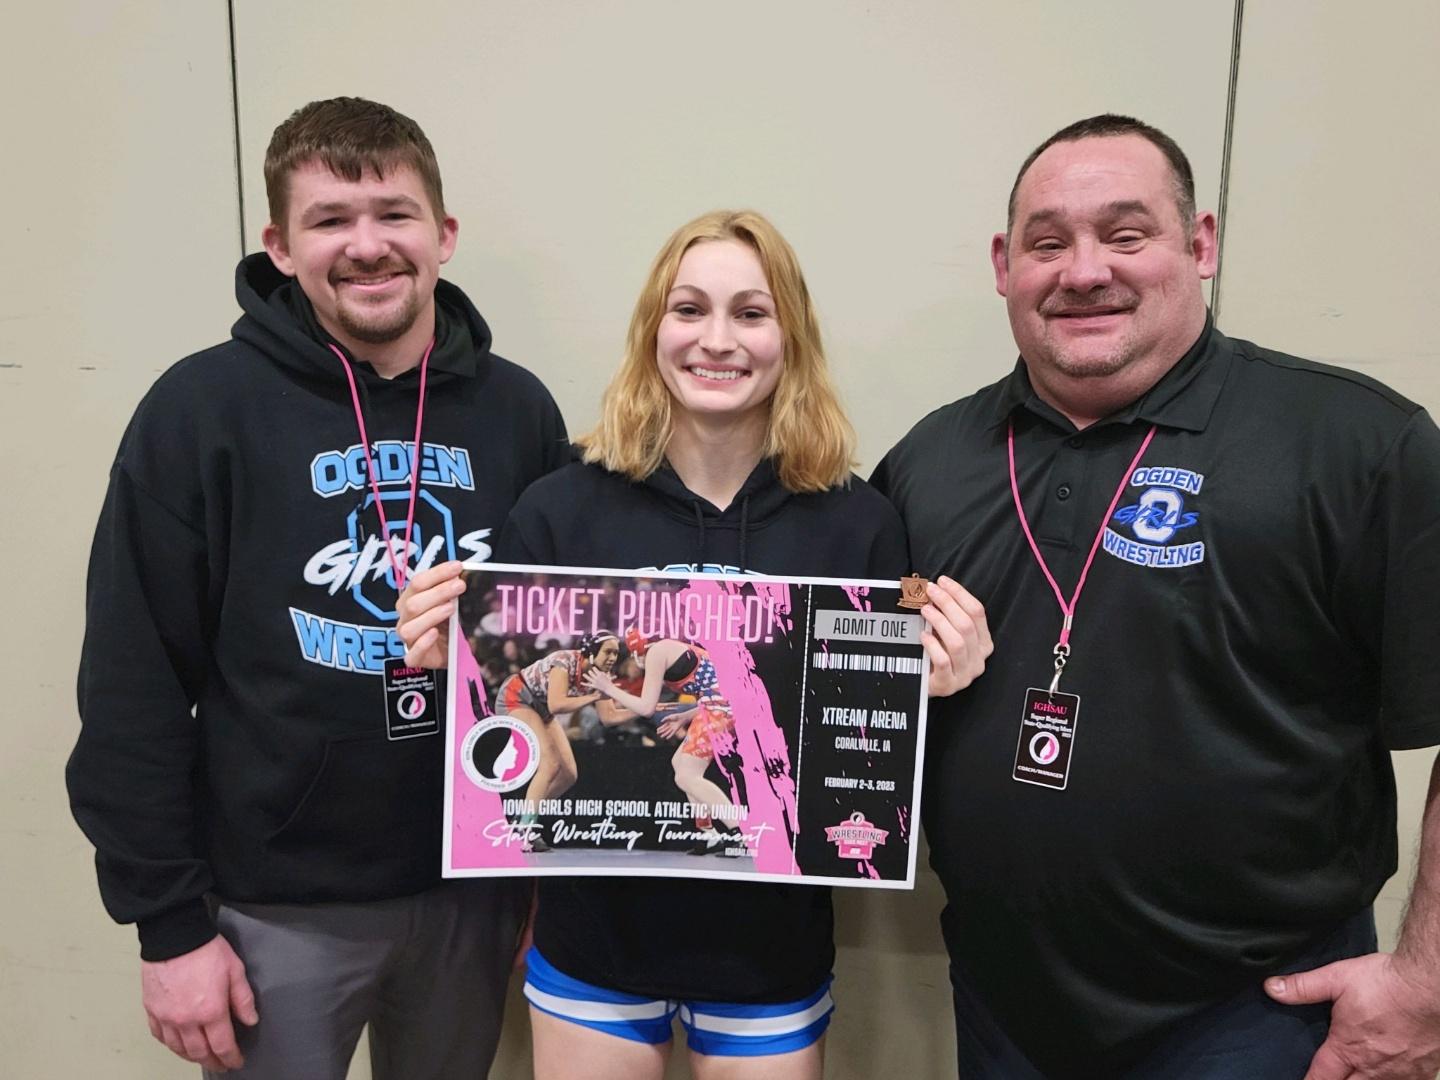 Ogden Girls Wrestling Results from January 27th (State Qualifying Meet: Top 4 advance to state)